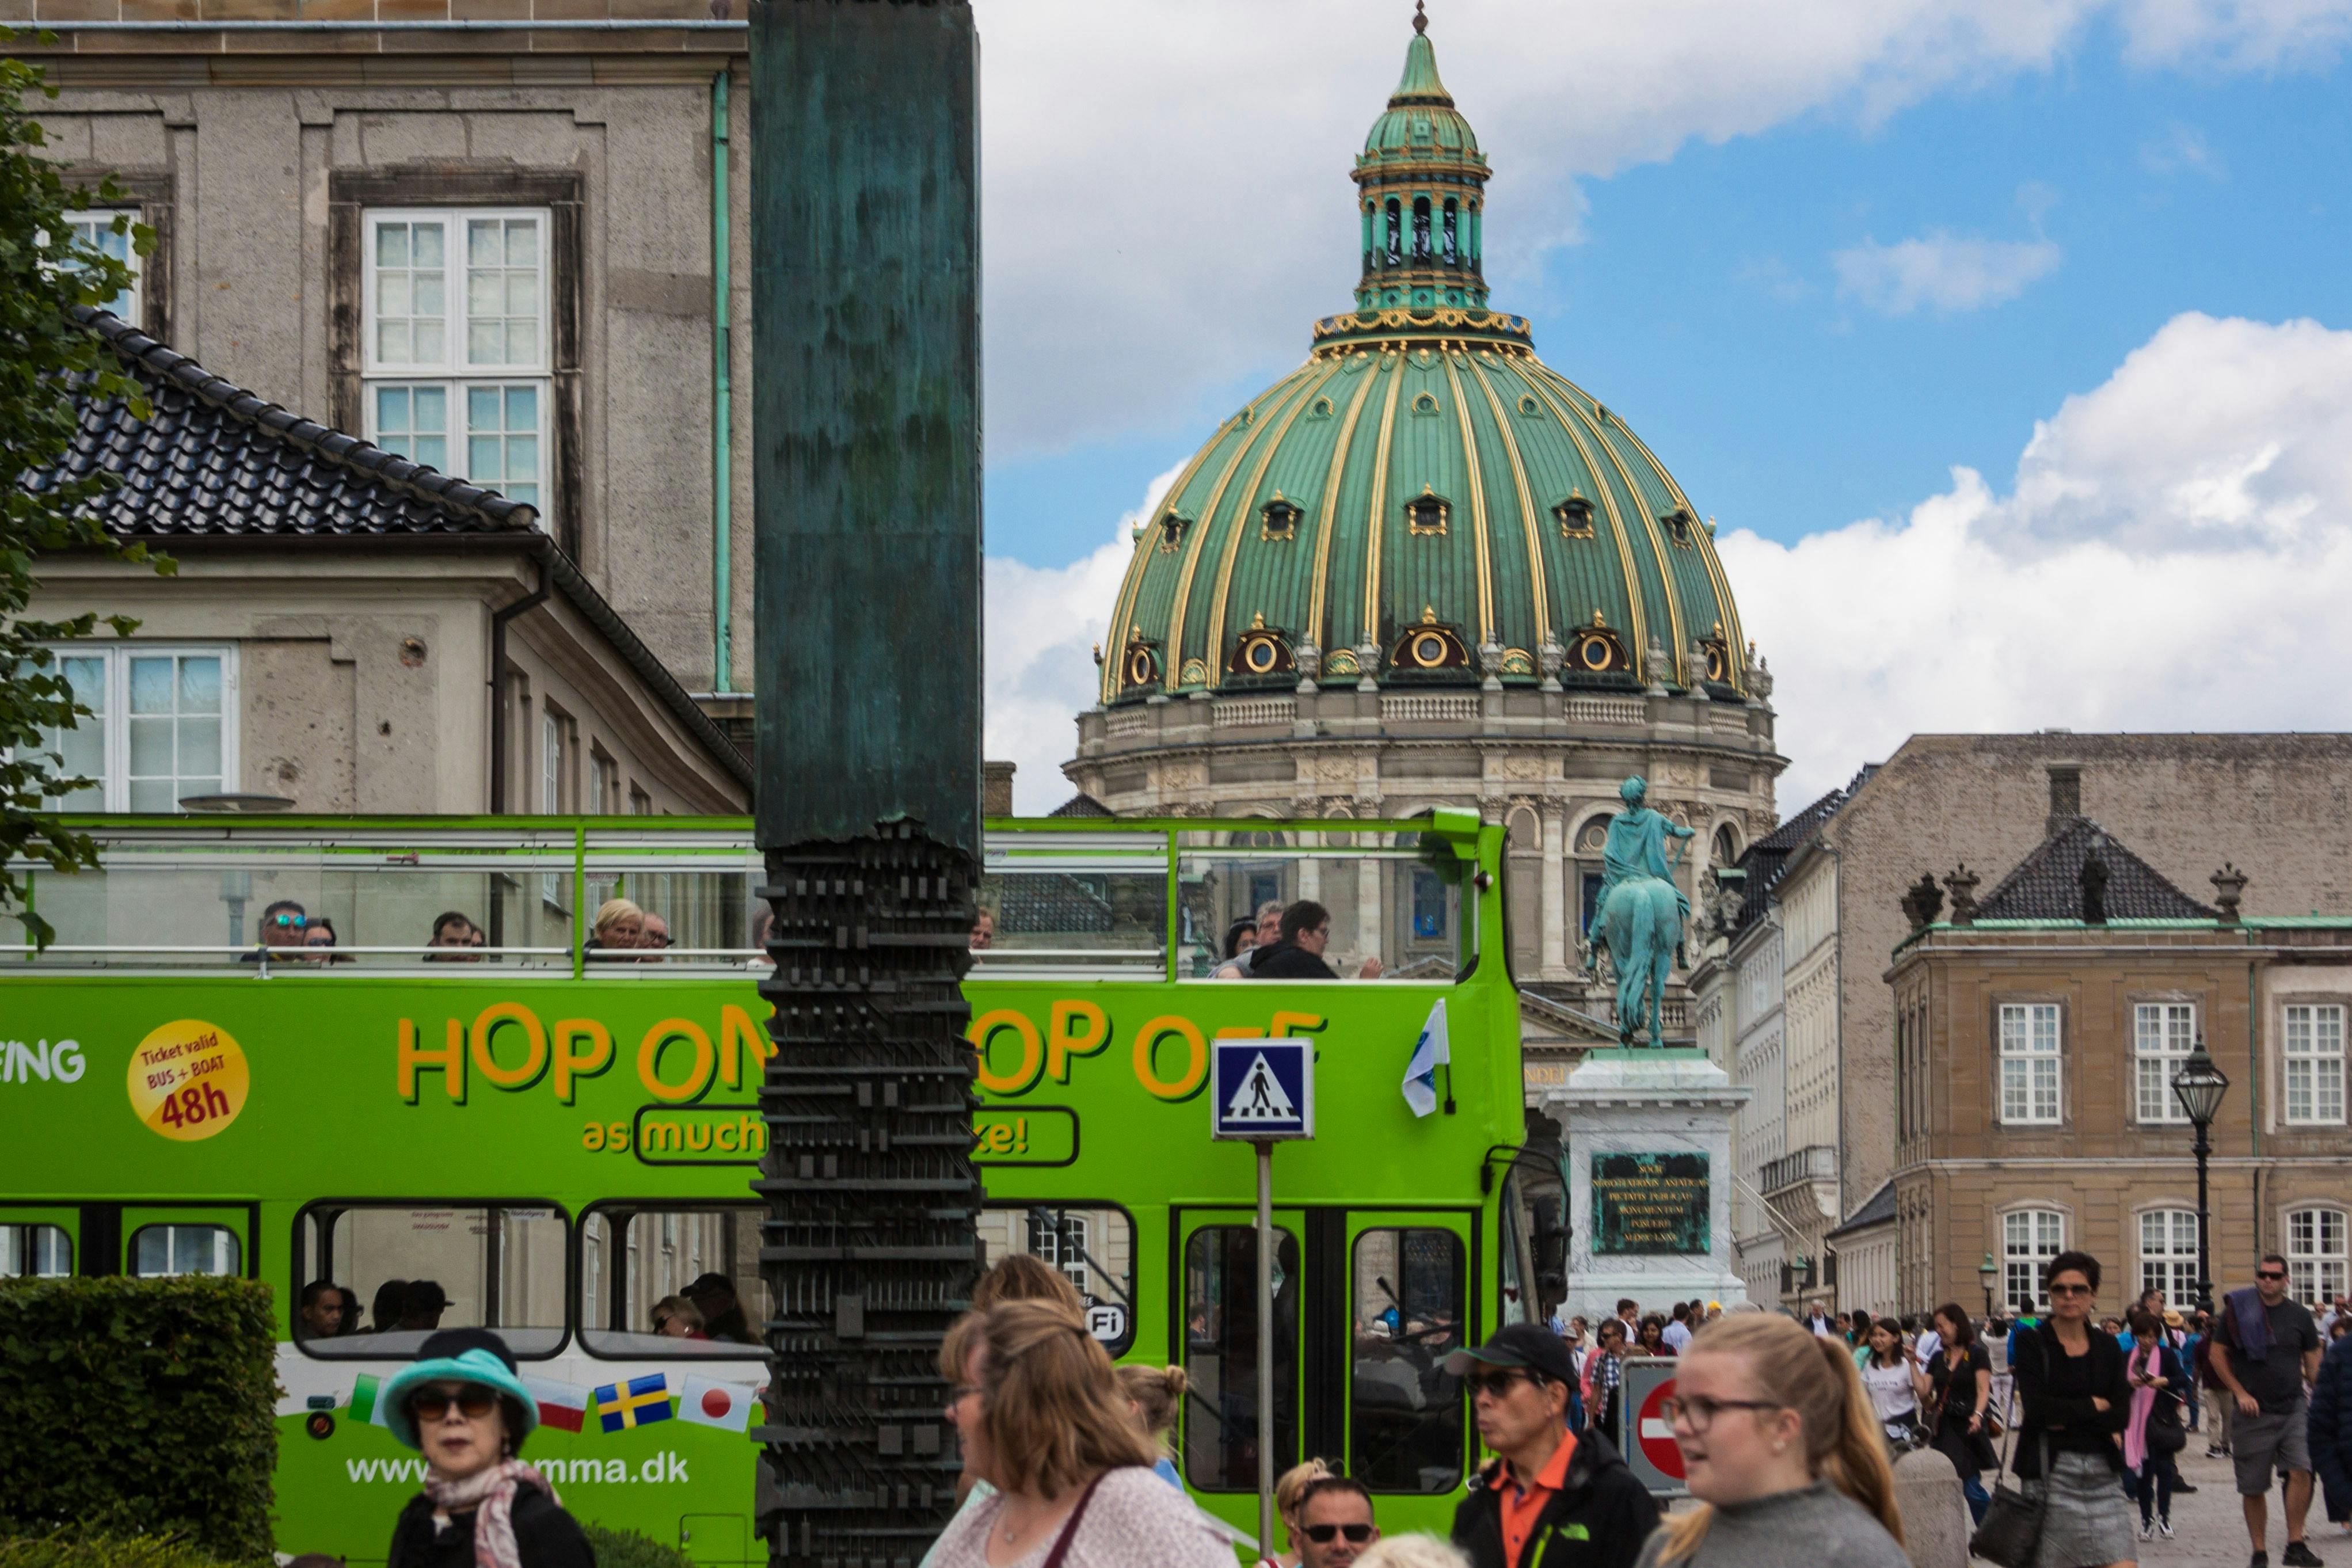 Hop-on hop-off tickets (bus and boat) | musement